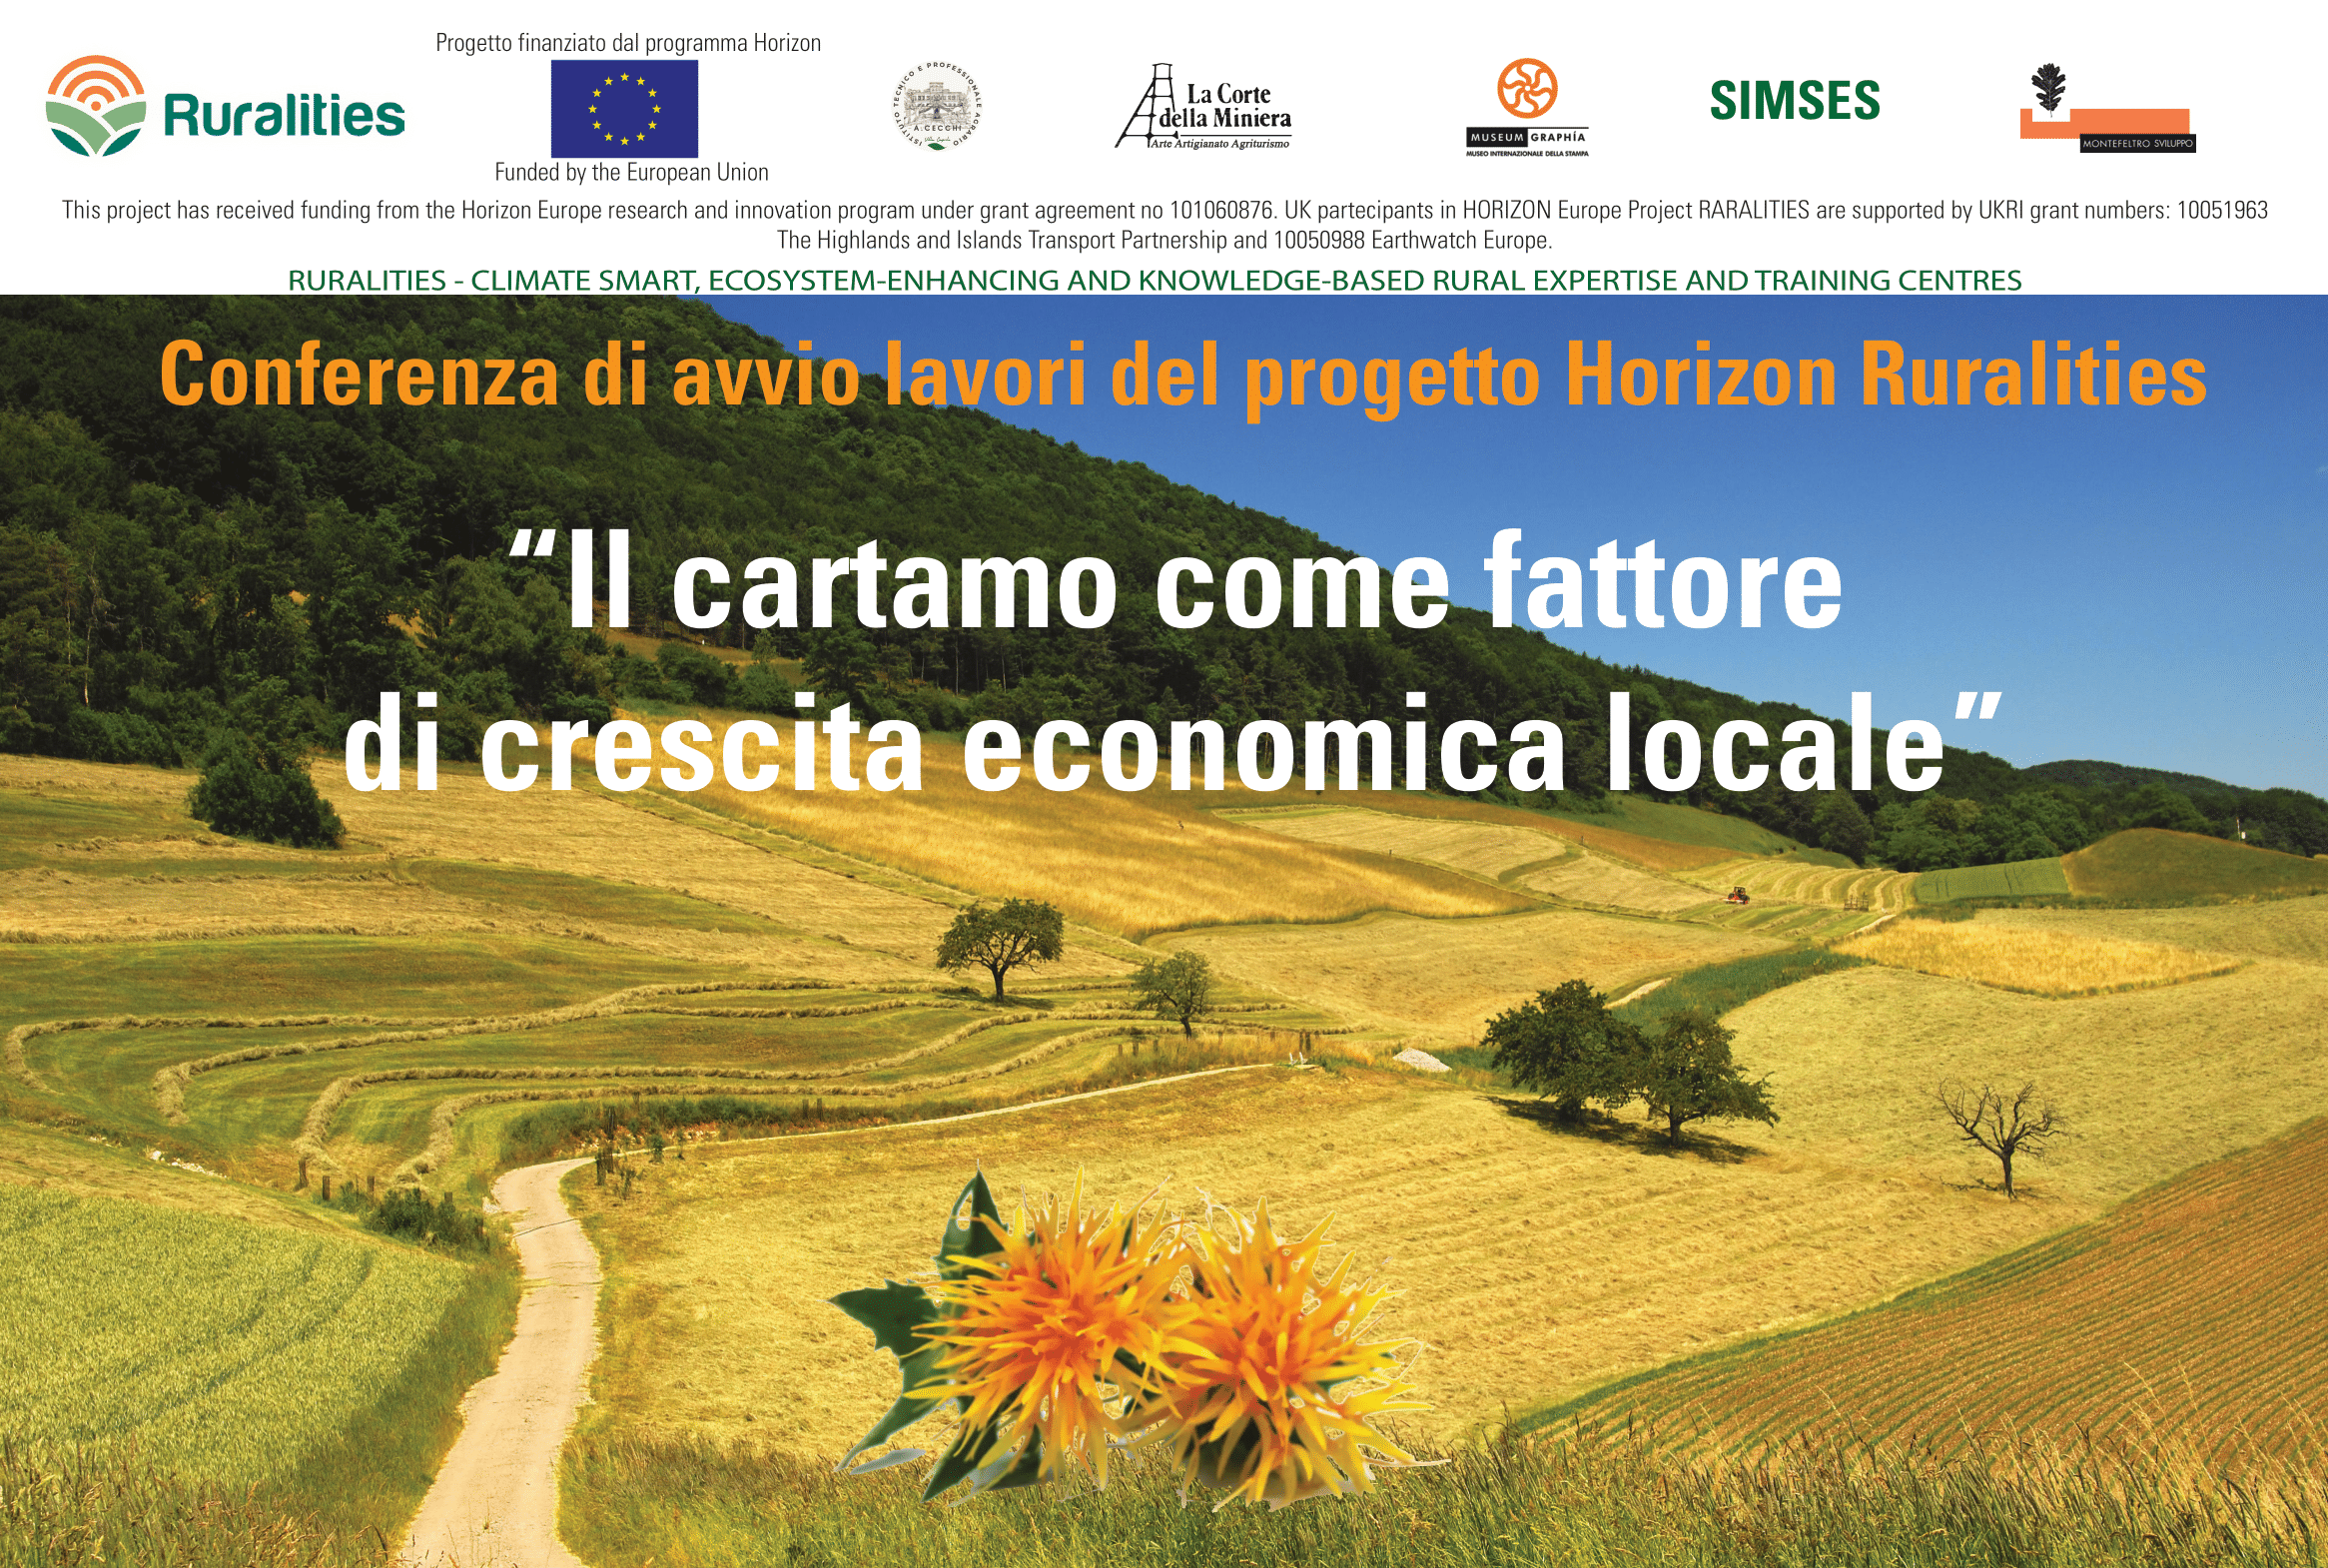 Upcoming Conference: “Safflower as a factor of local economic growth”